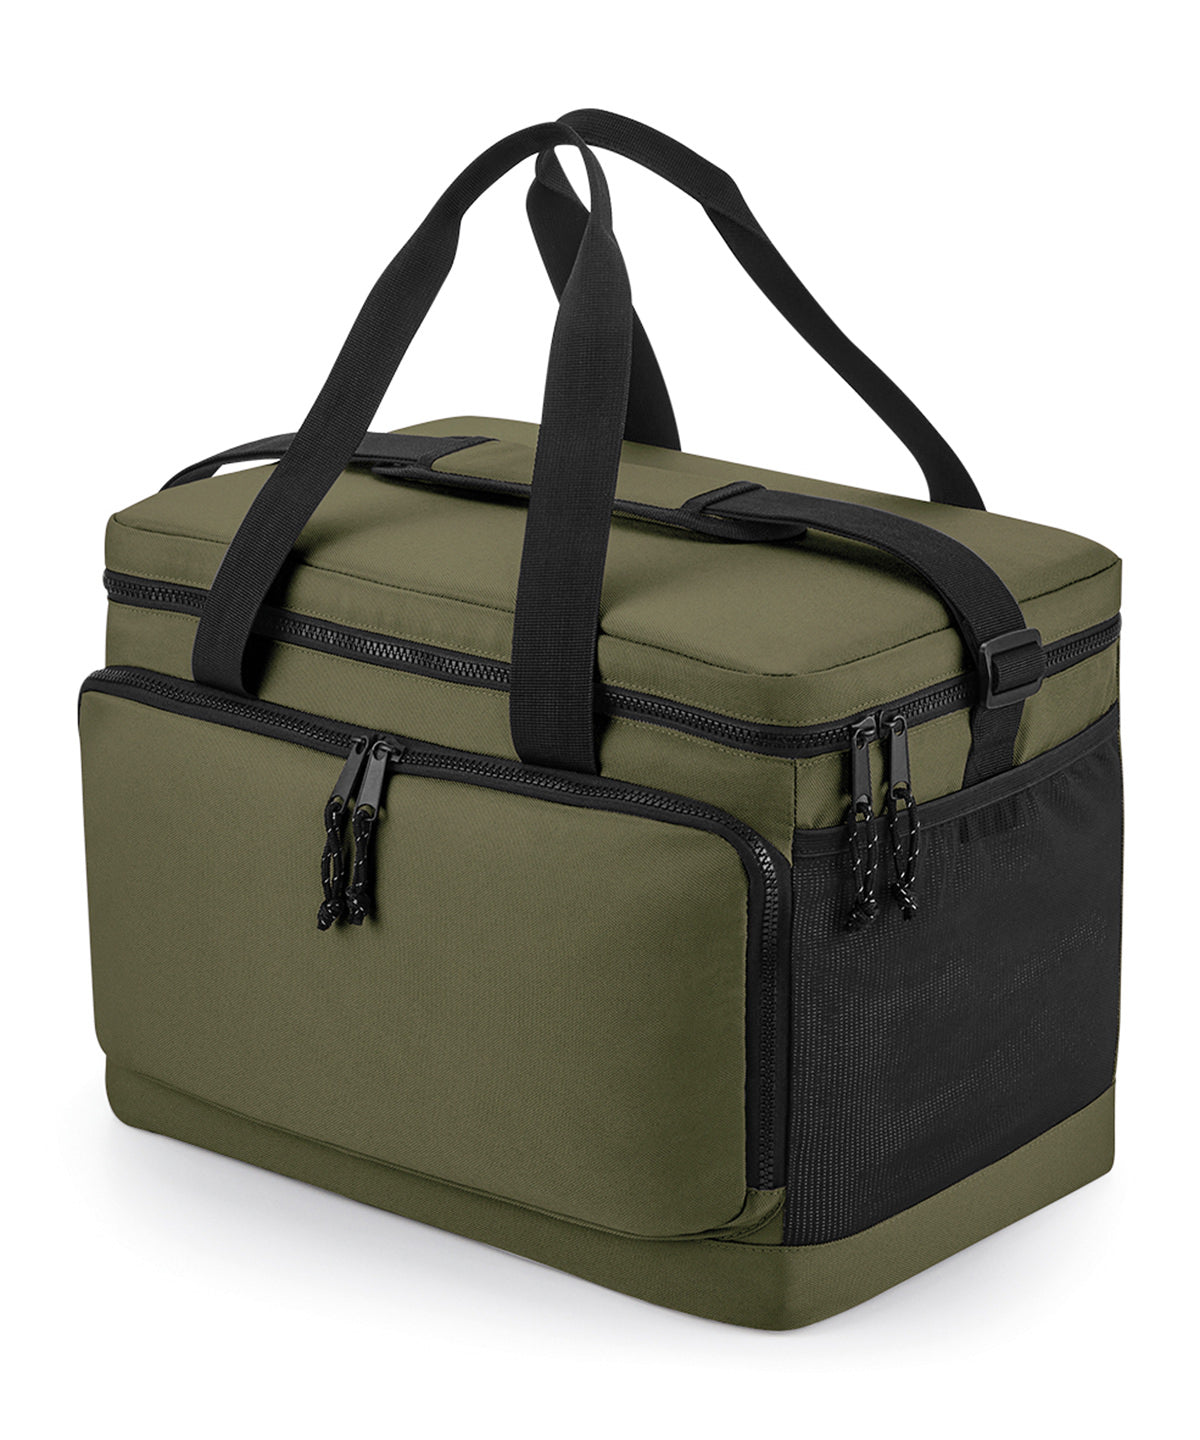 Personalised Bags - Camouflage Bagbase Recycled large cooler shoulder bag